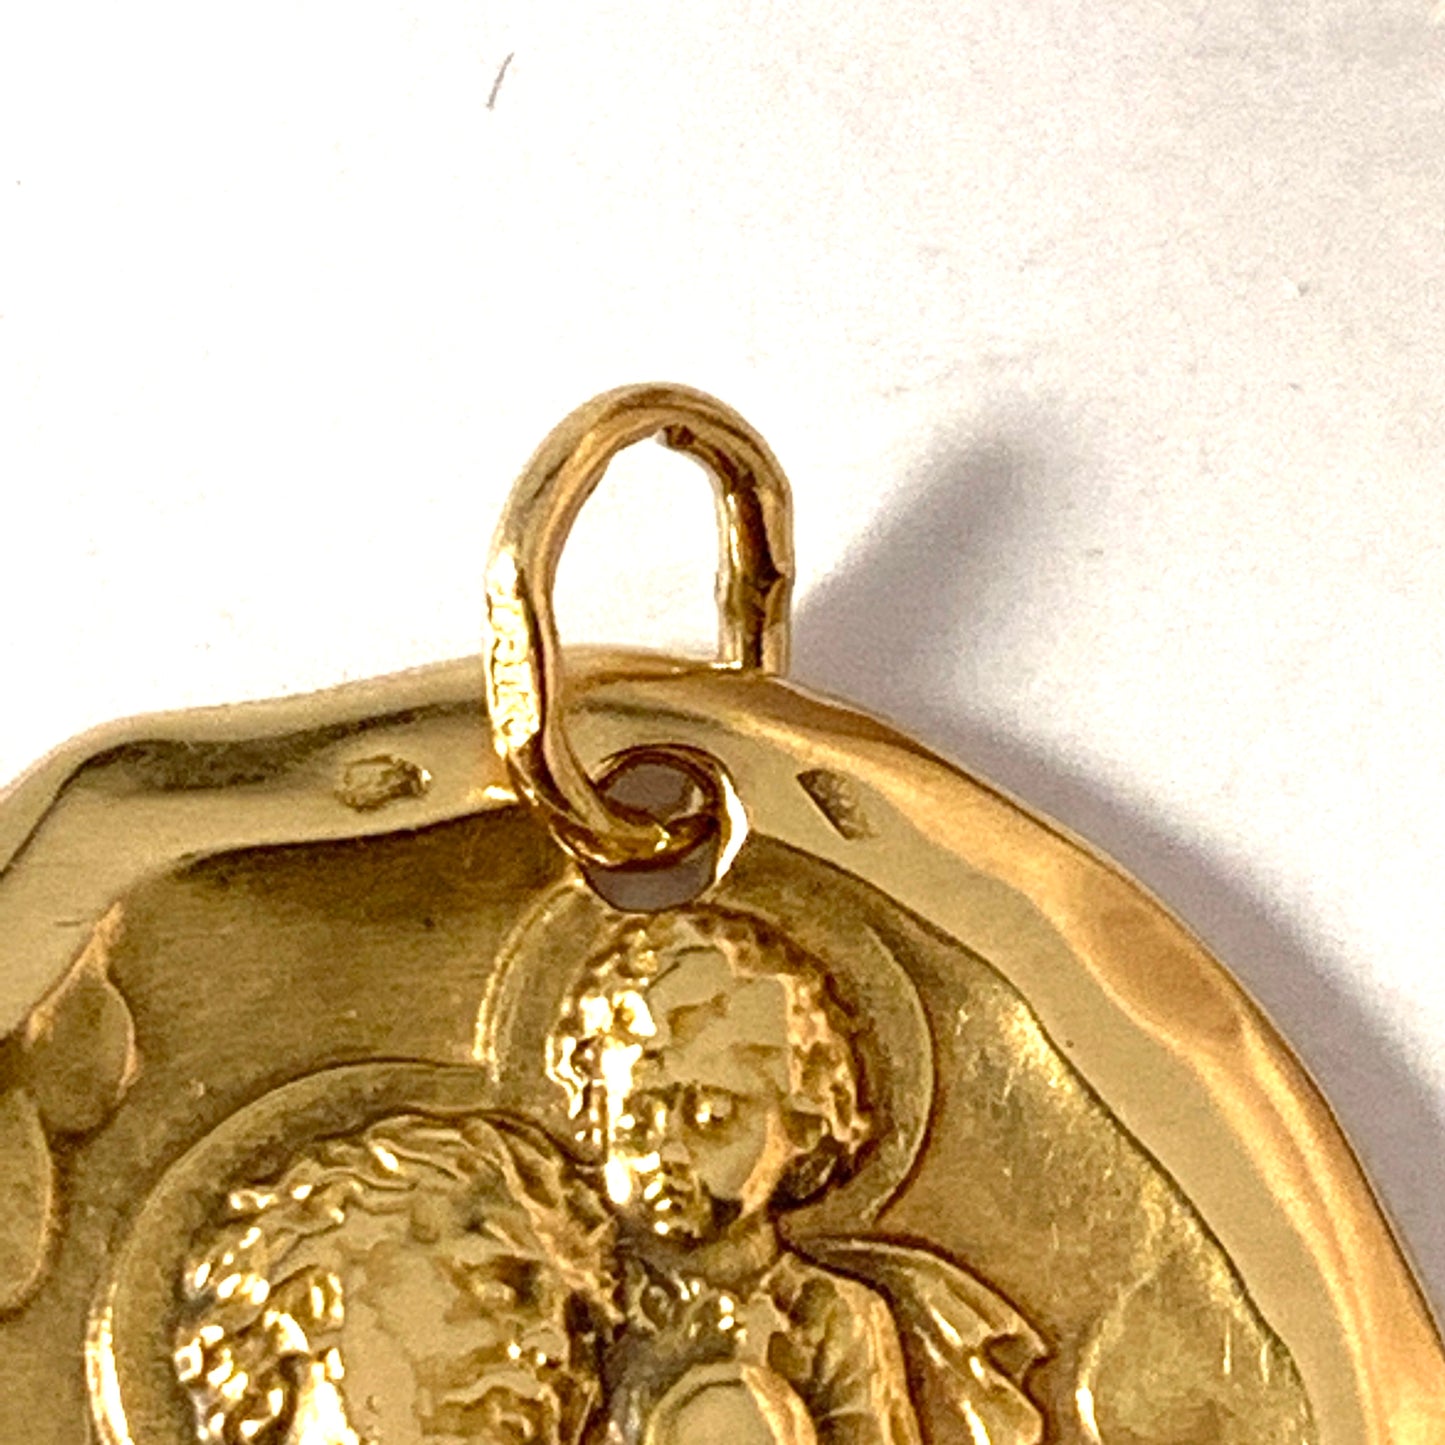 France early 1900s. Solid 18k Gold Medal Pendant. Fully Hallmarked and Signed. 6.1gram